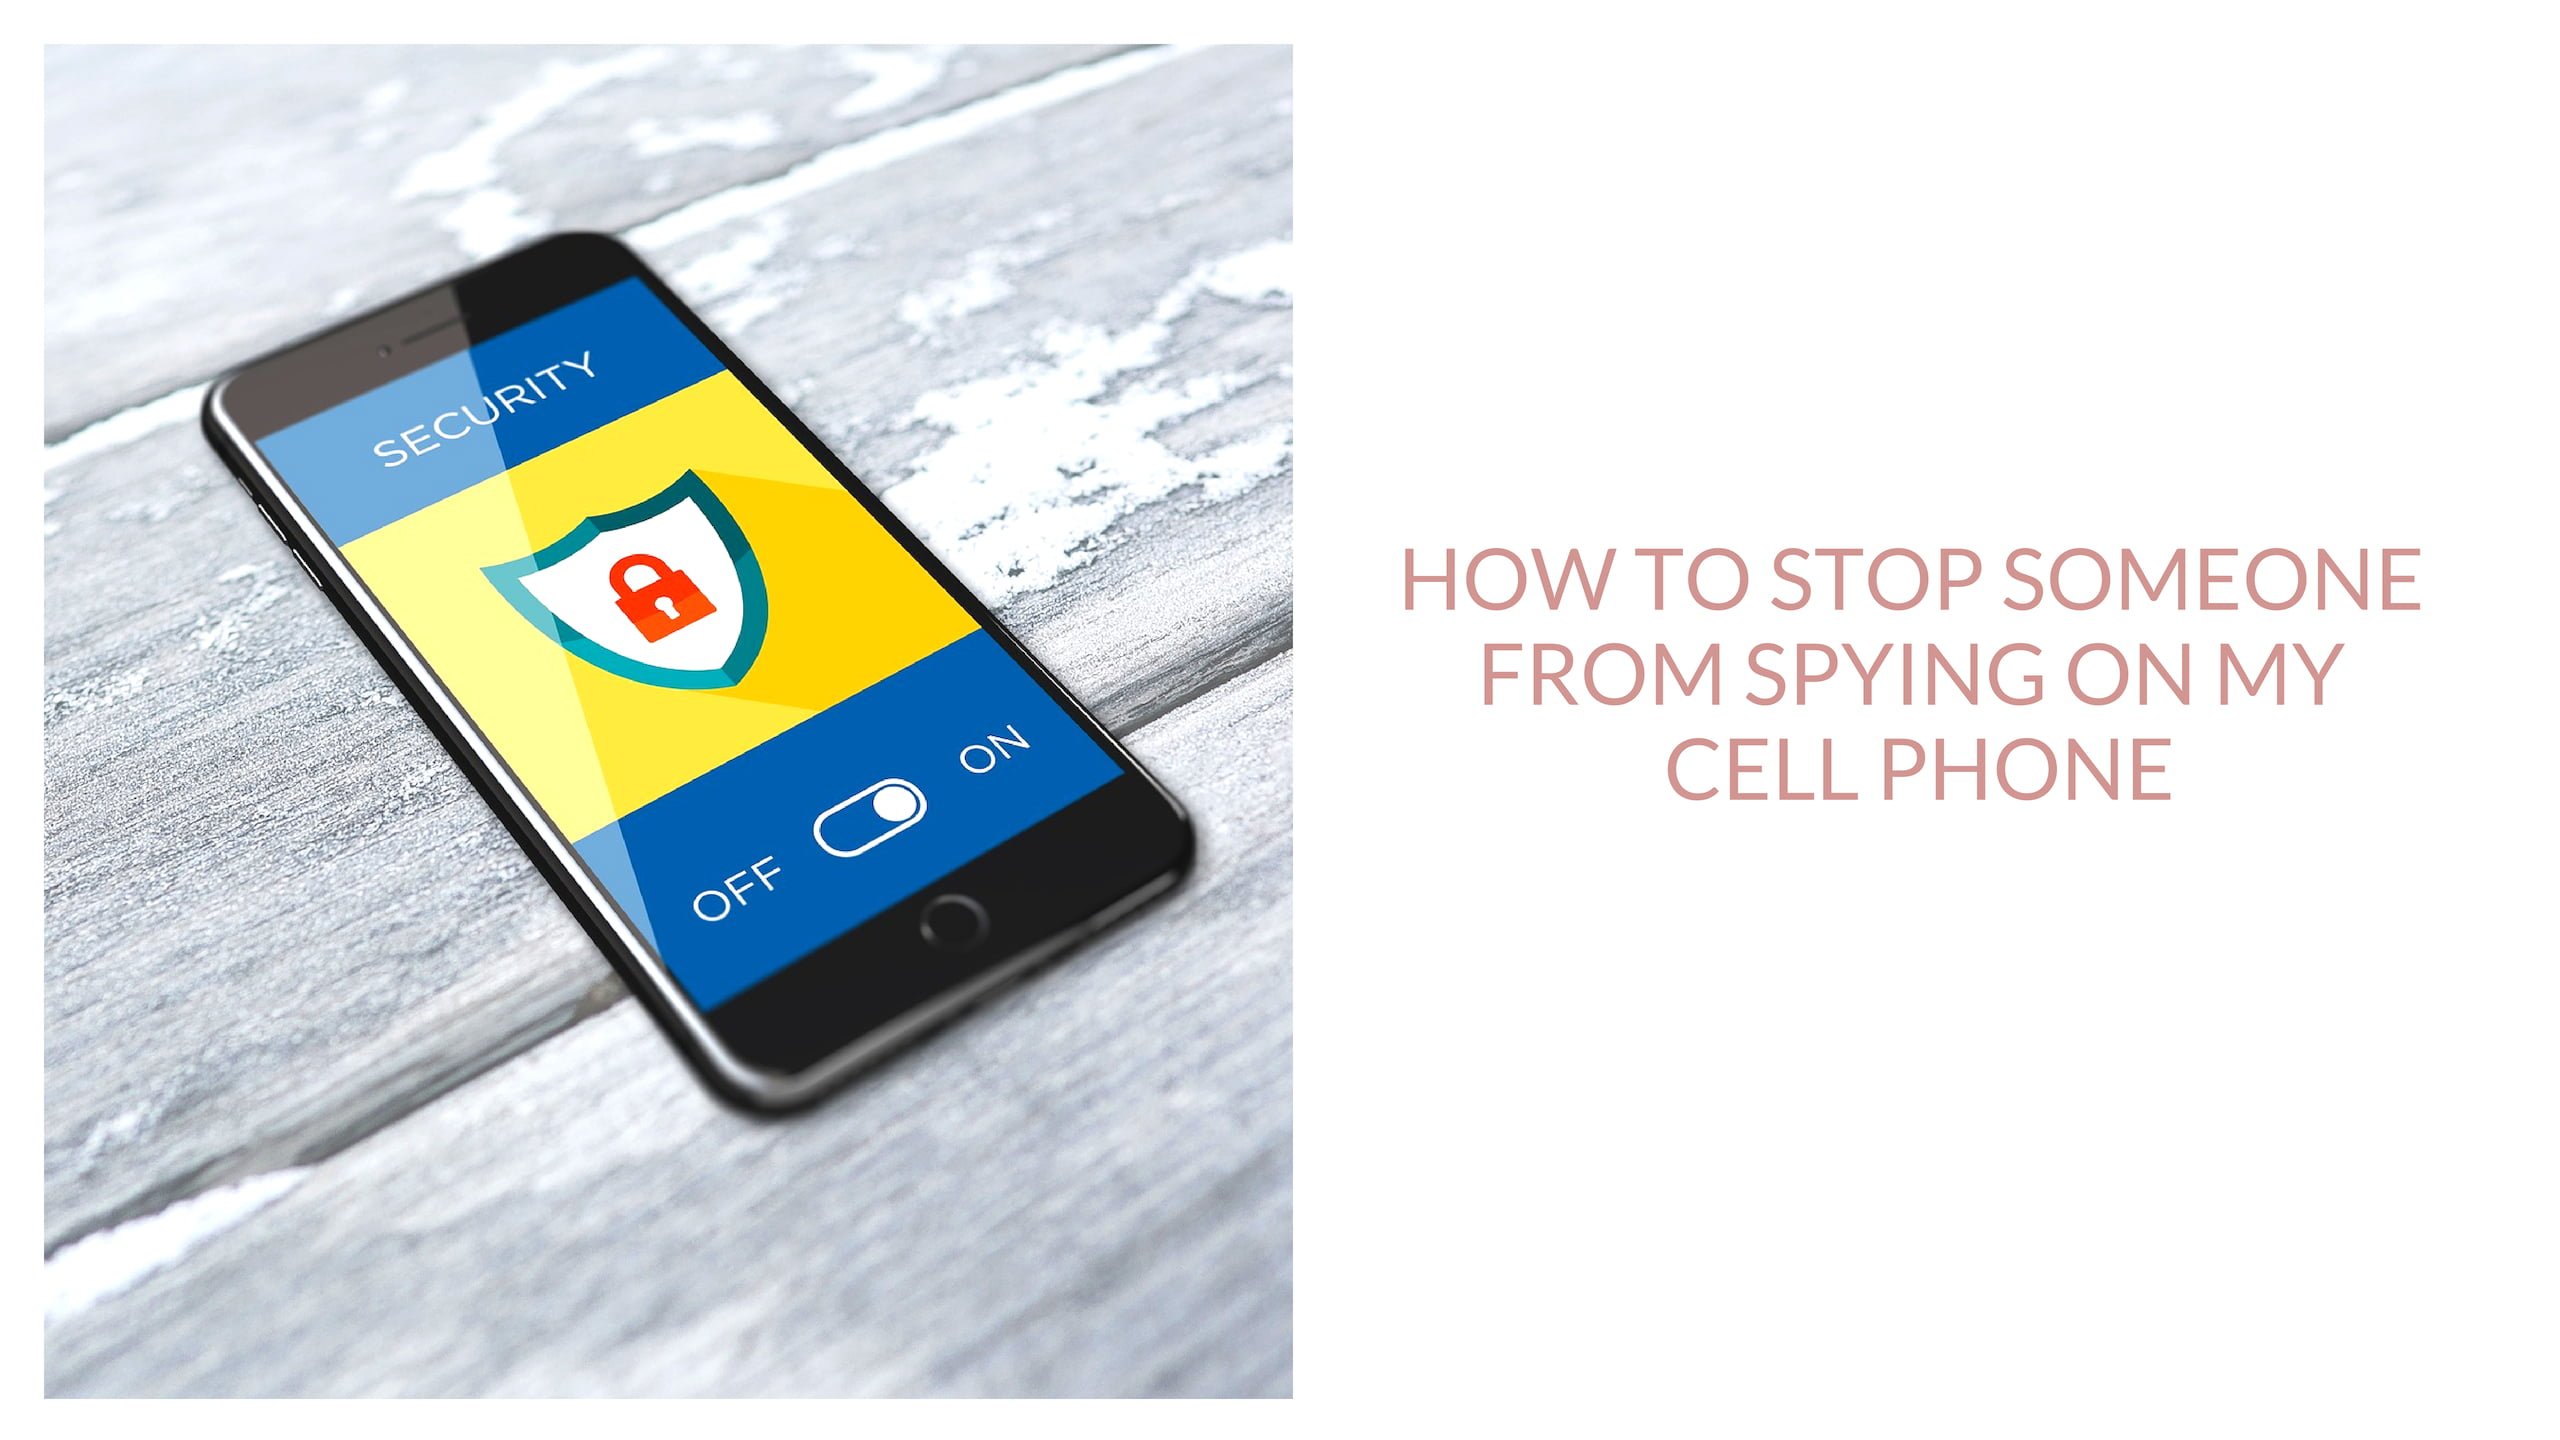 how to stop someone spying on your cell phone